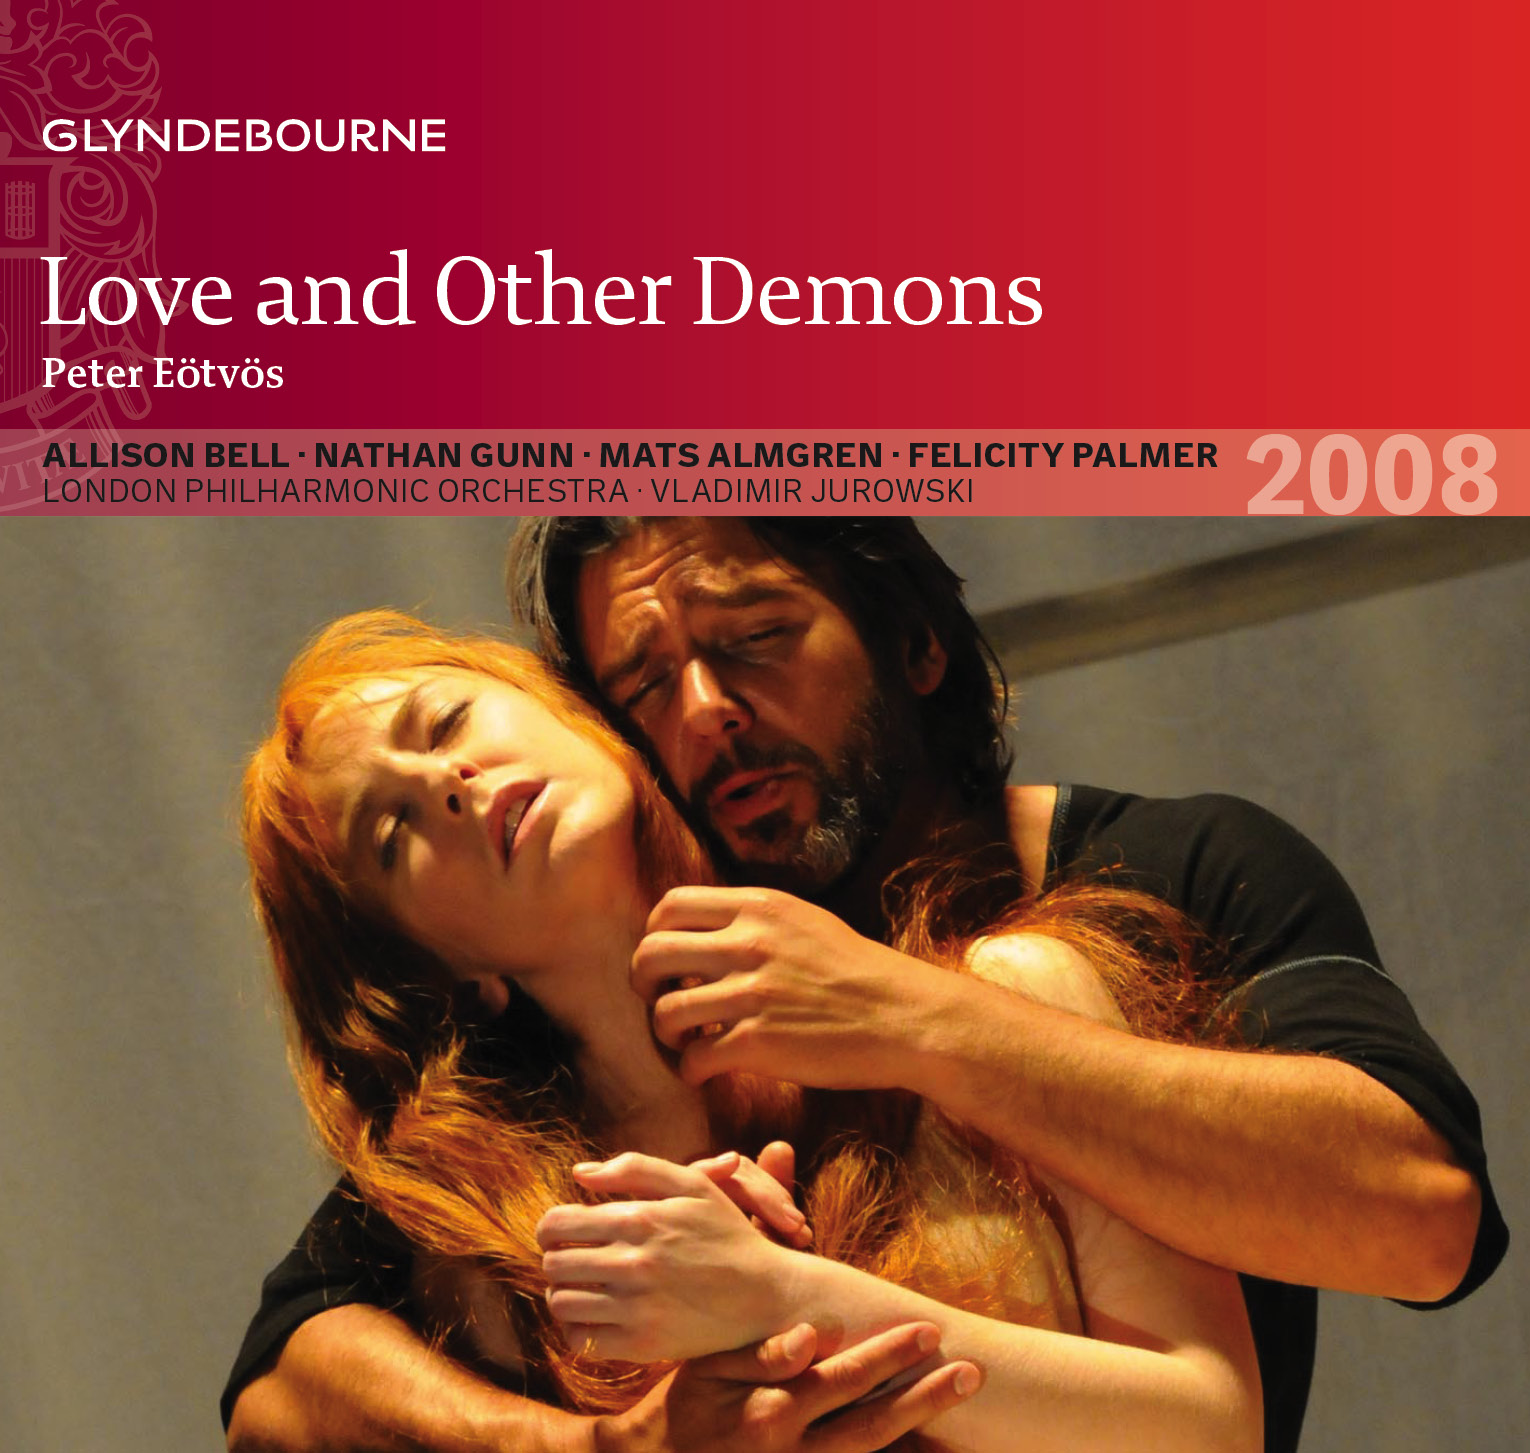 Love and Other Demons